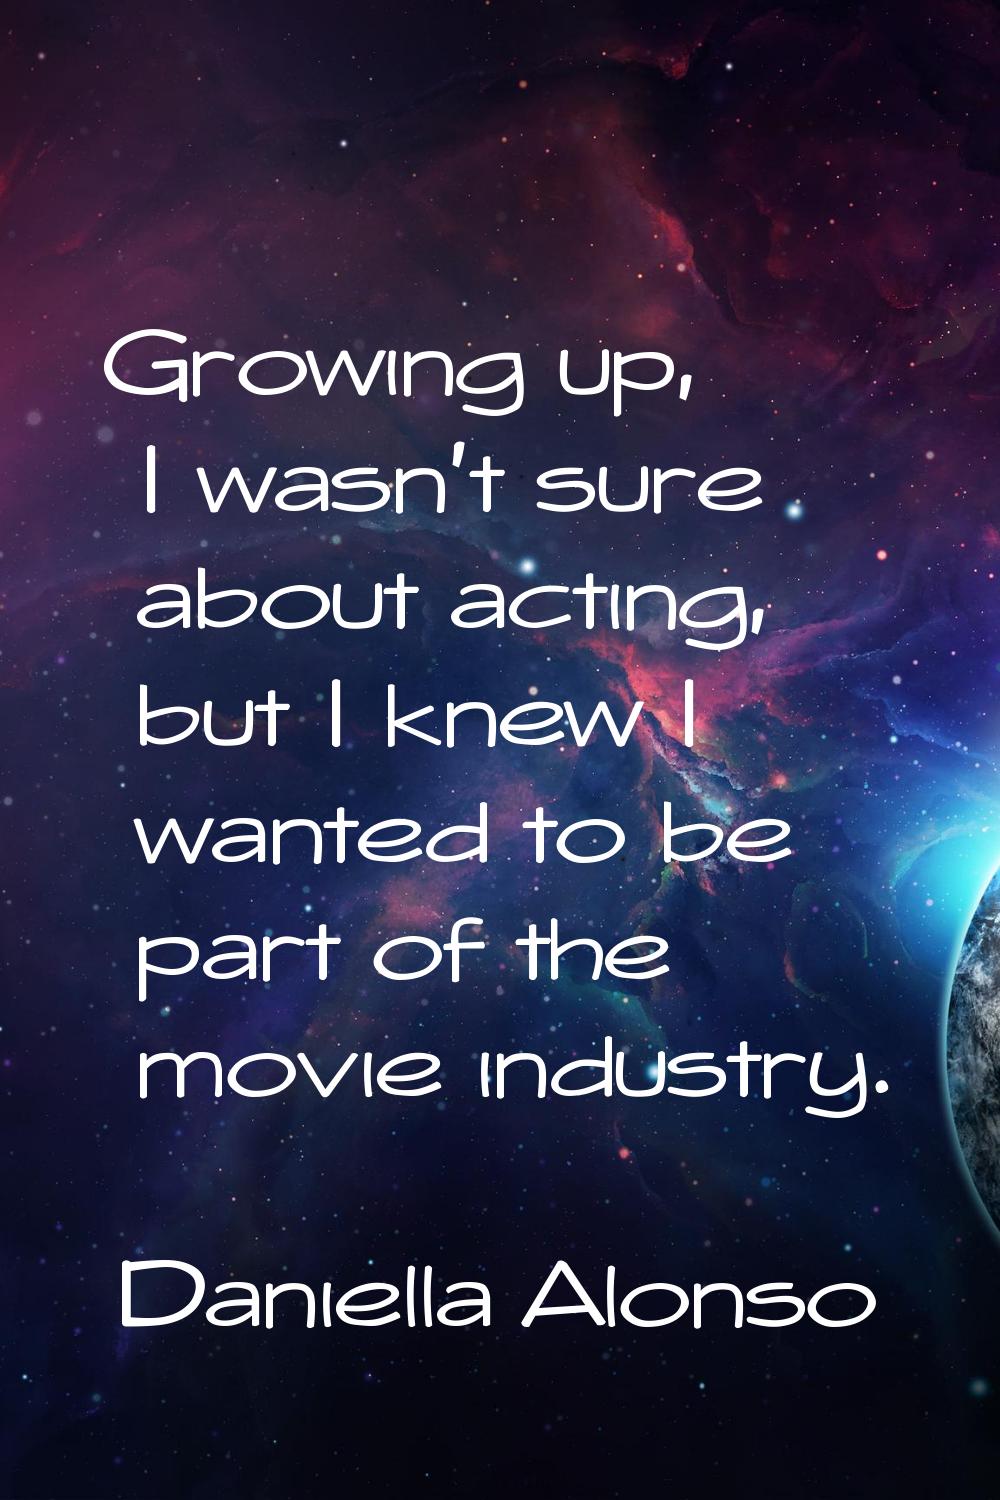 Growing up, I wasn't sure about acting, but I knew I wanted to be part of the movie industry.